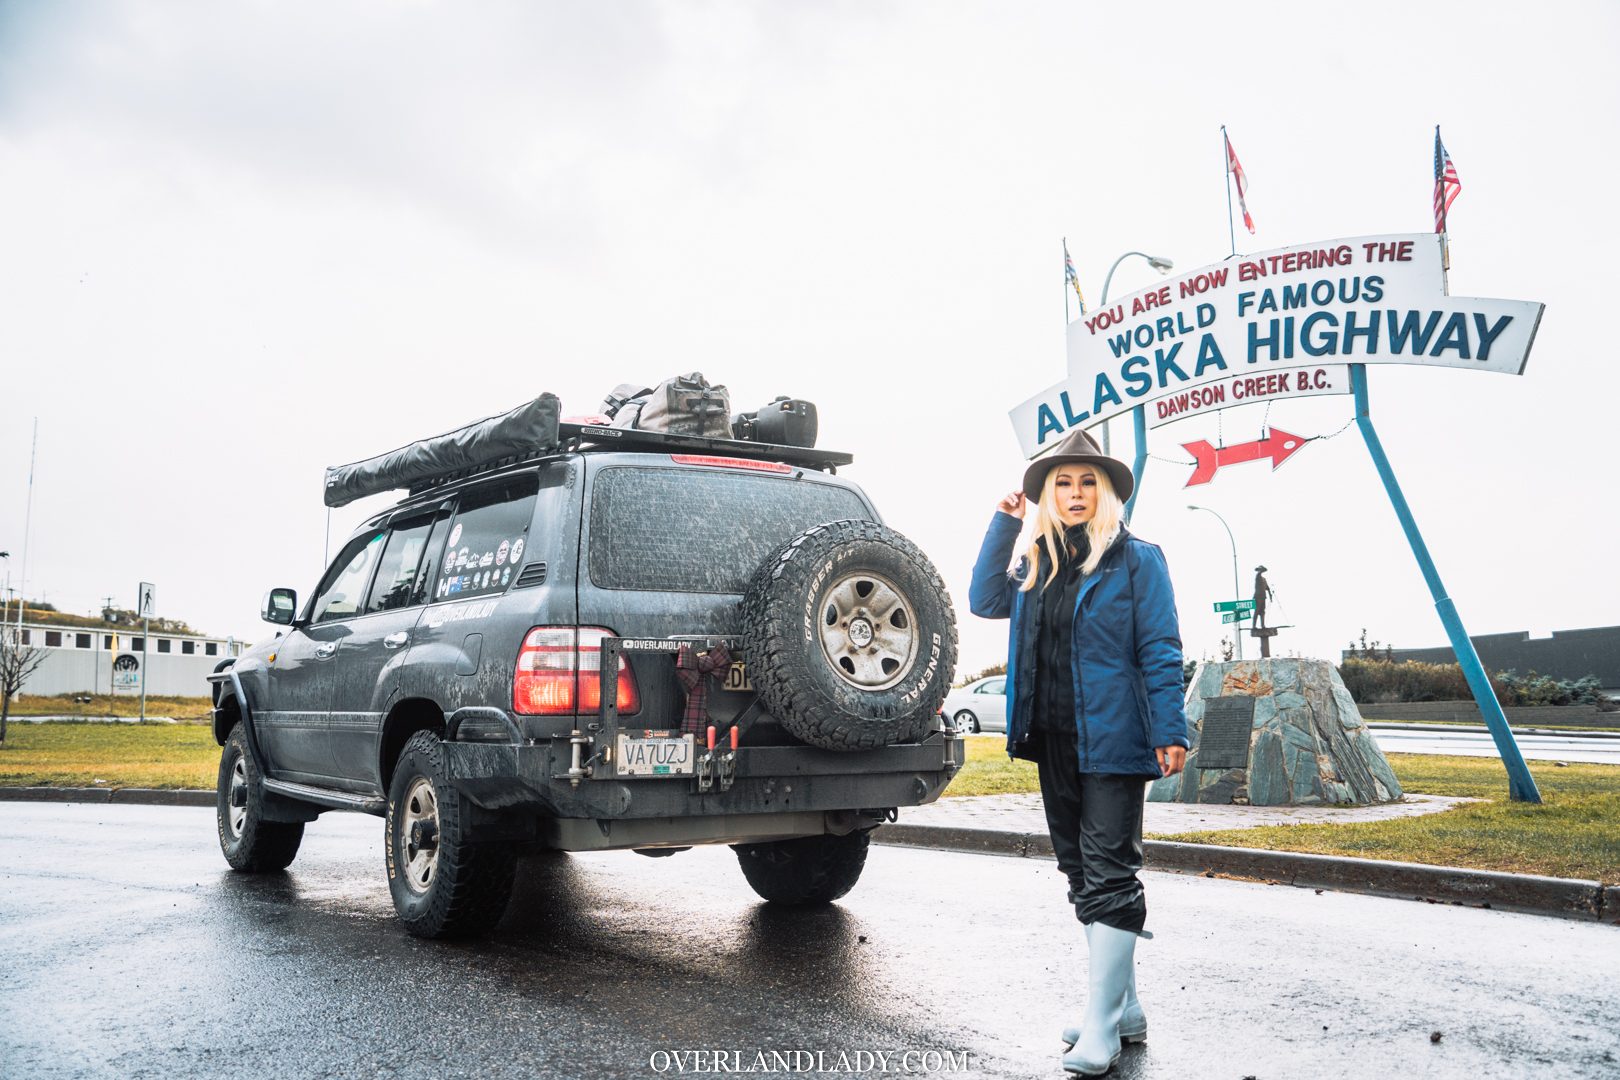 Alaska Highway Mile 0 Overland lady 7 | Overland Lady by Monique Song